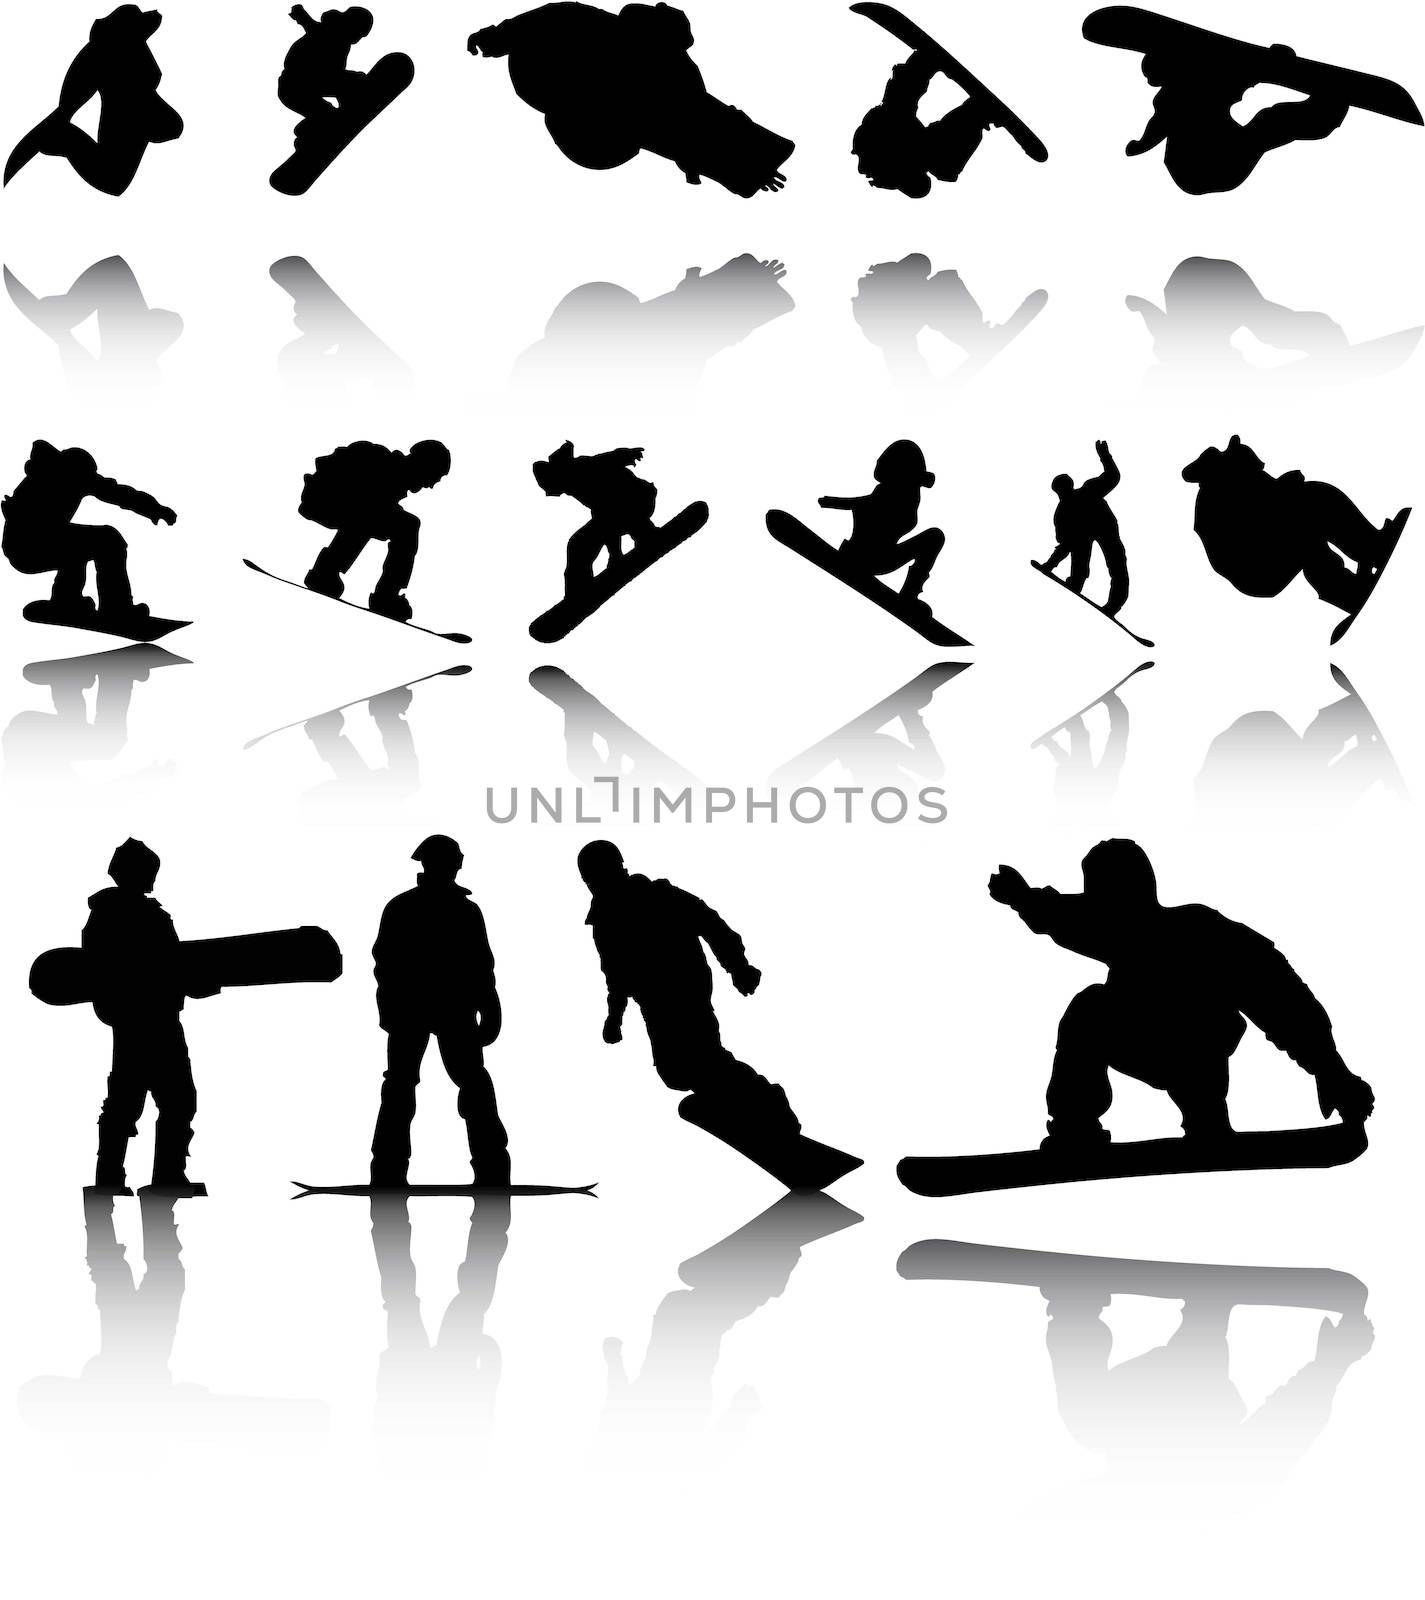 Illustration of Silhouettes of Snowboarders with reflection by DragonEyeMedia